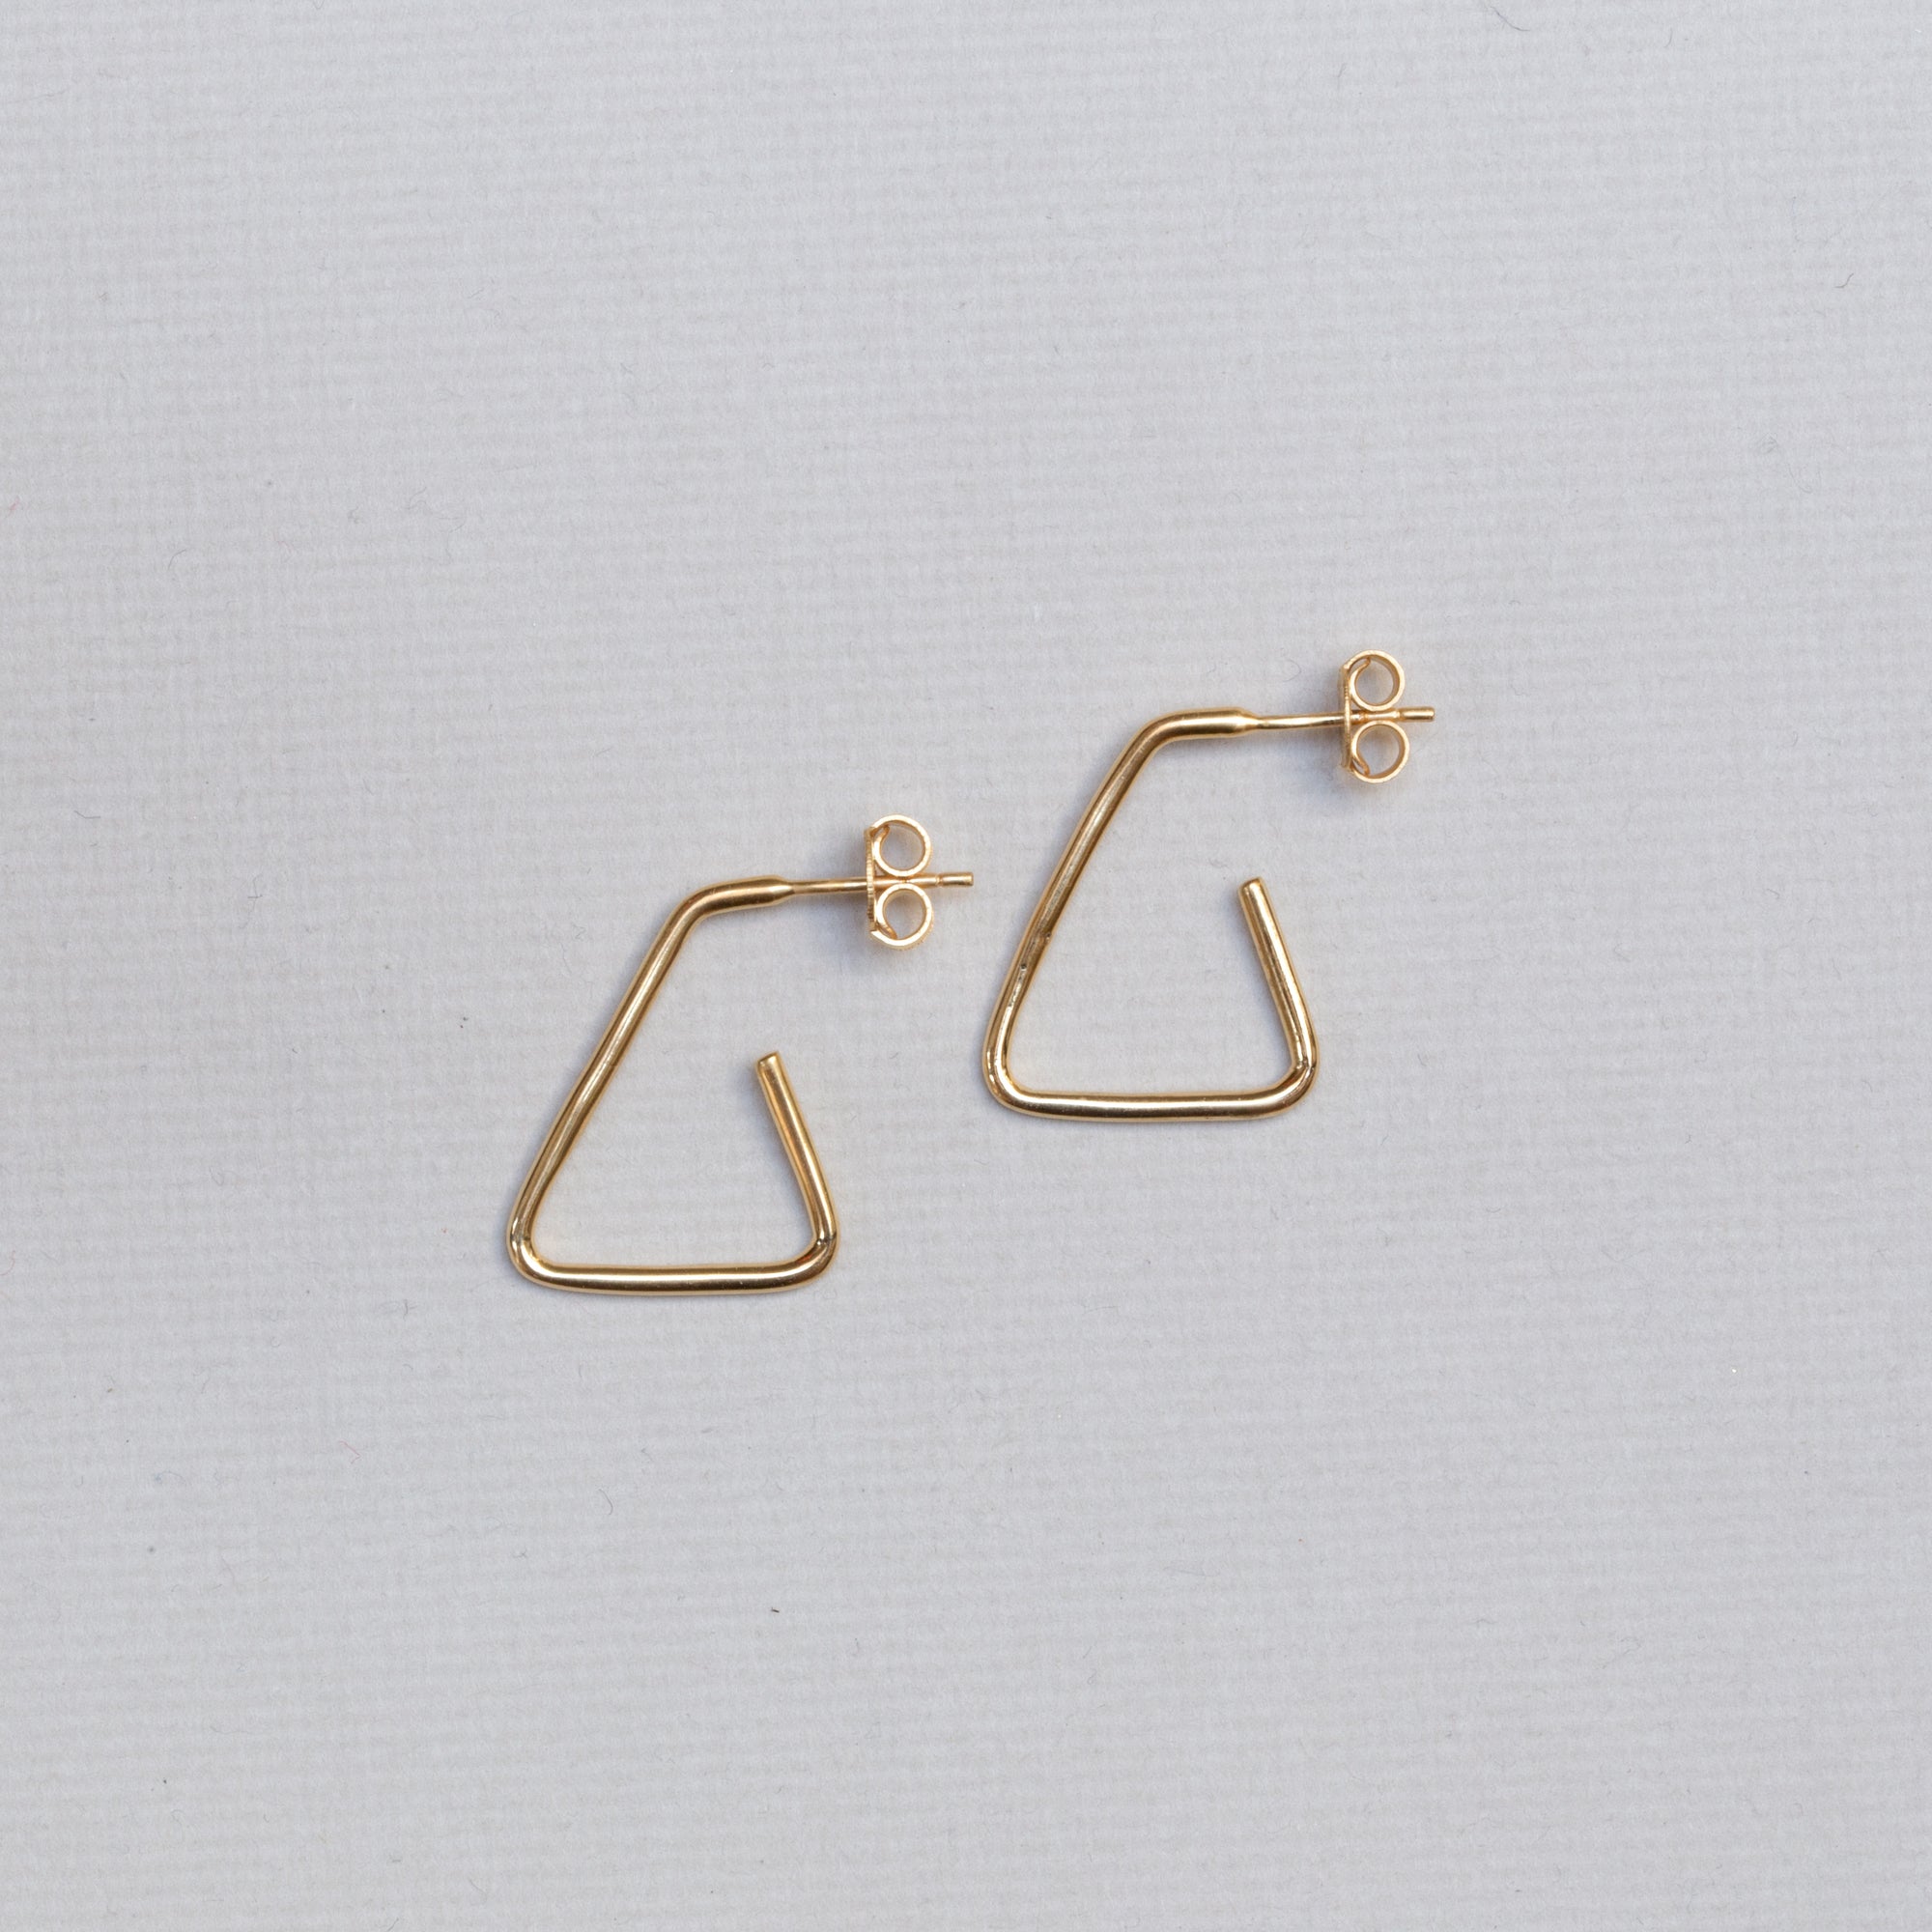 Gold-plated Open Triangle Stud Earrings